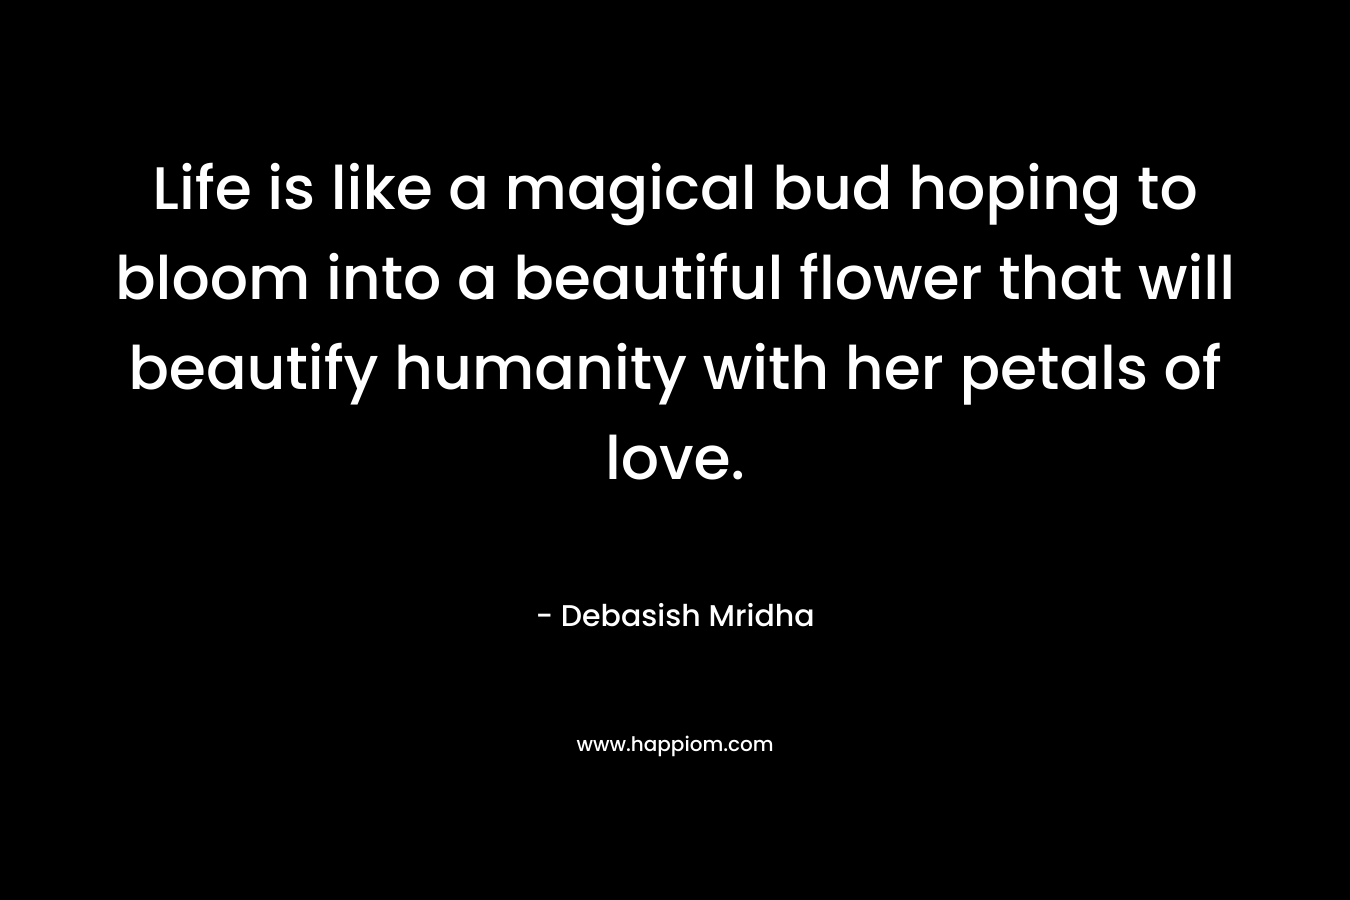 Life is like a magical bud hoping to bloom into a beautiful flower that will beautify humanity with her petals of love. – Debasish Mridha